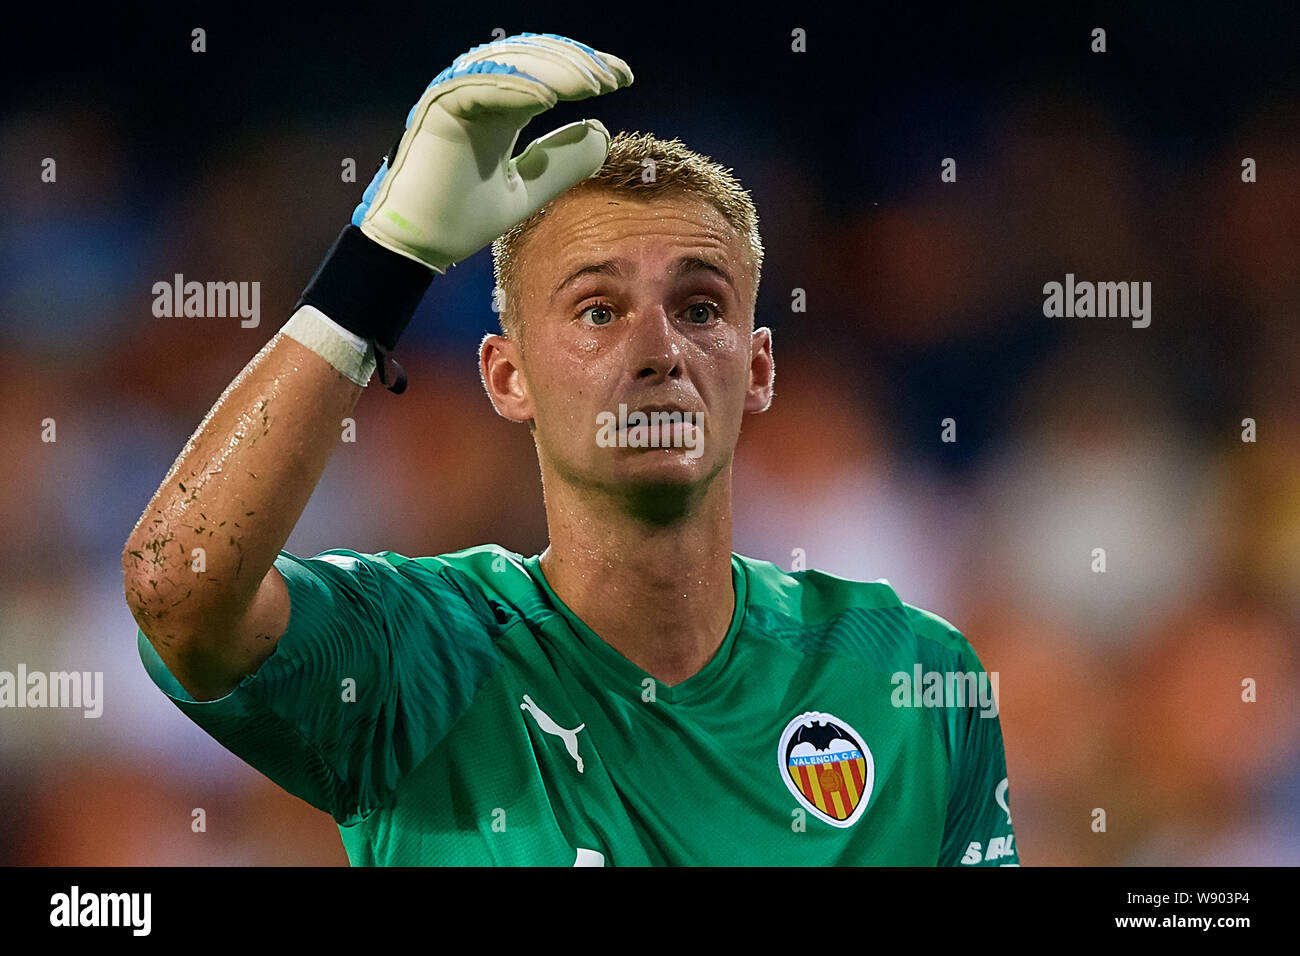 VALENCIA, SPAIN - AUGUST 10: Jasper Cillessen of Valencia CF reacts during the Bwin Trofeo Naranja friendly match between Valencia CF and FC Internazionale at Estadio Mestalla on August 10, 2019 in Valencia, Spain. (Photo by Get Ready Images/MB Media) Stock Photo